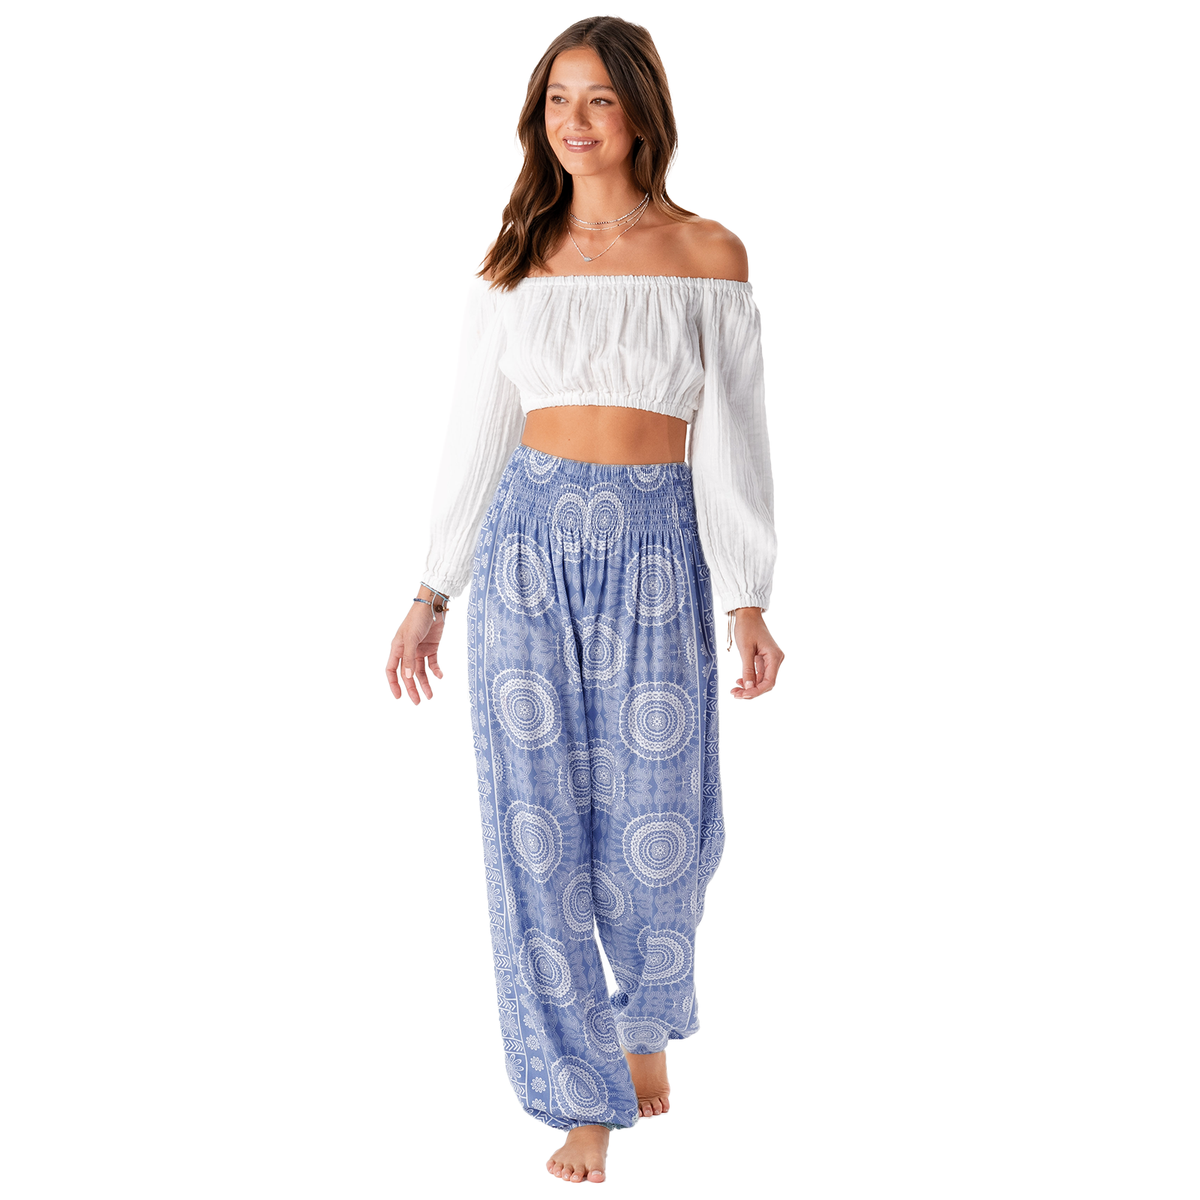 Model wearing an off shoulder white long sleeve top and a pair of periwinkle and white mandala print harem pants